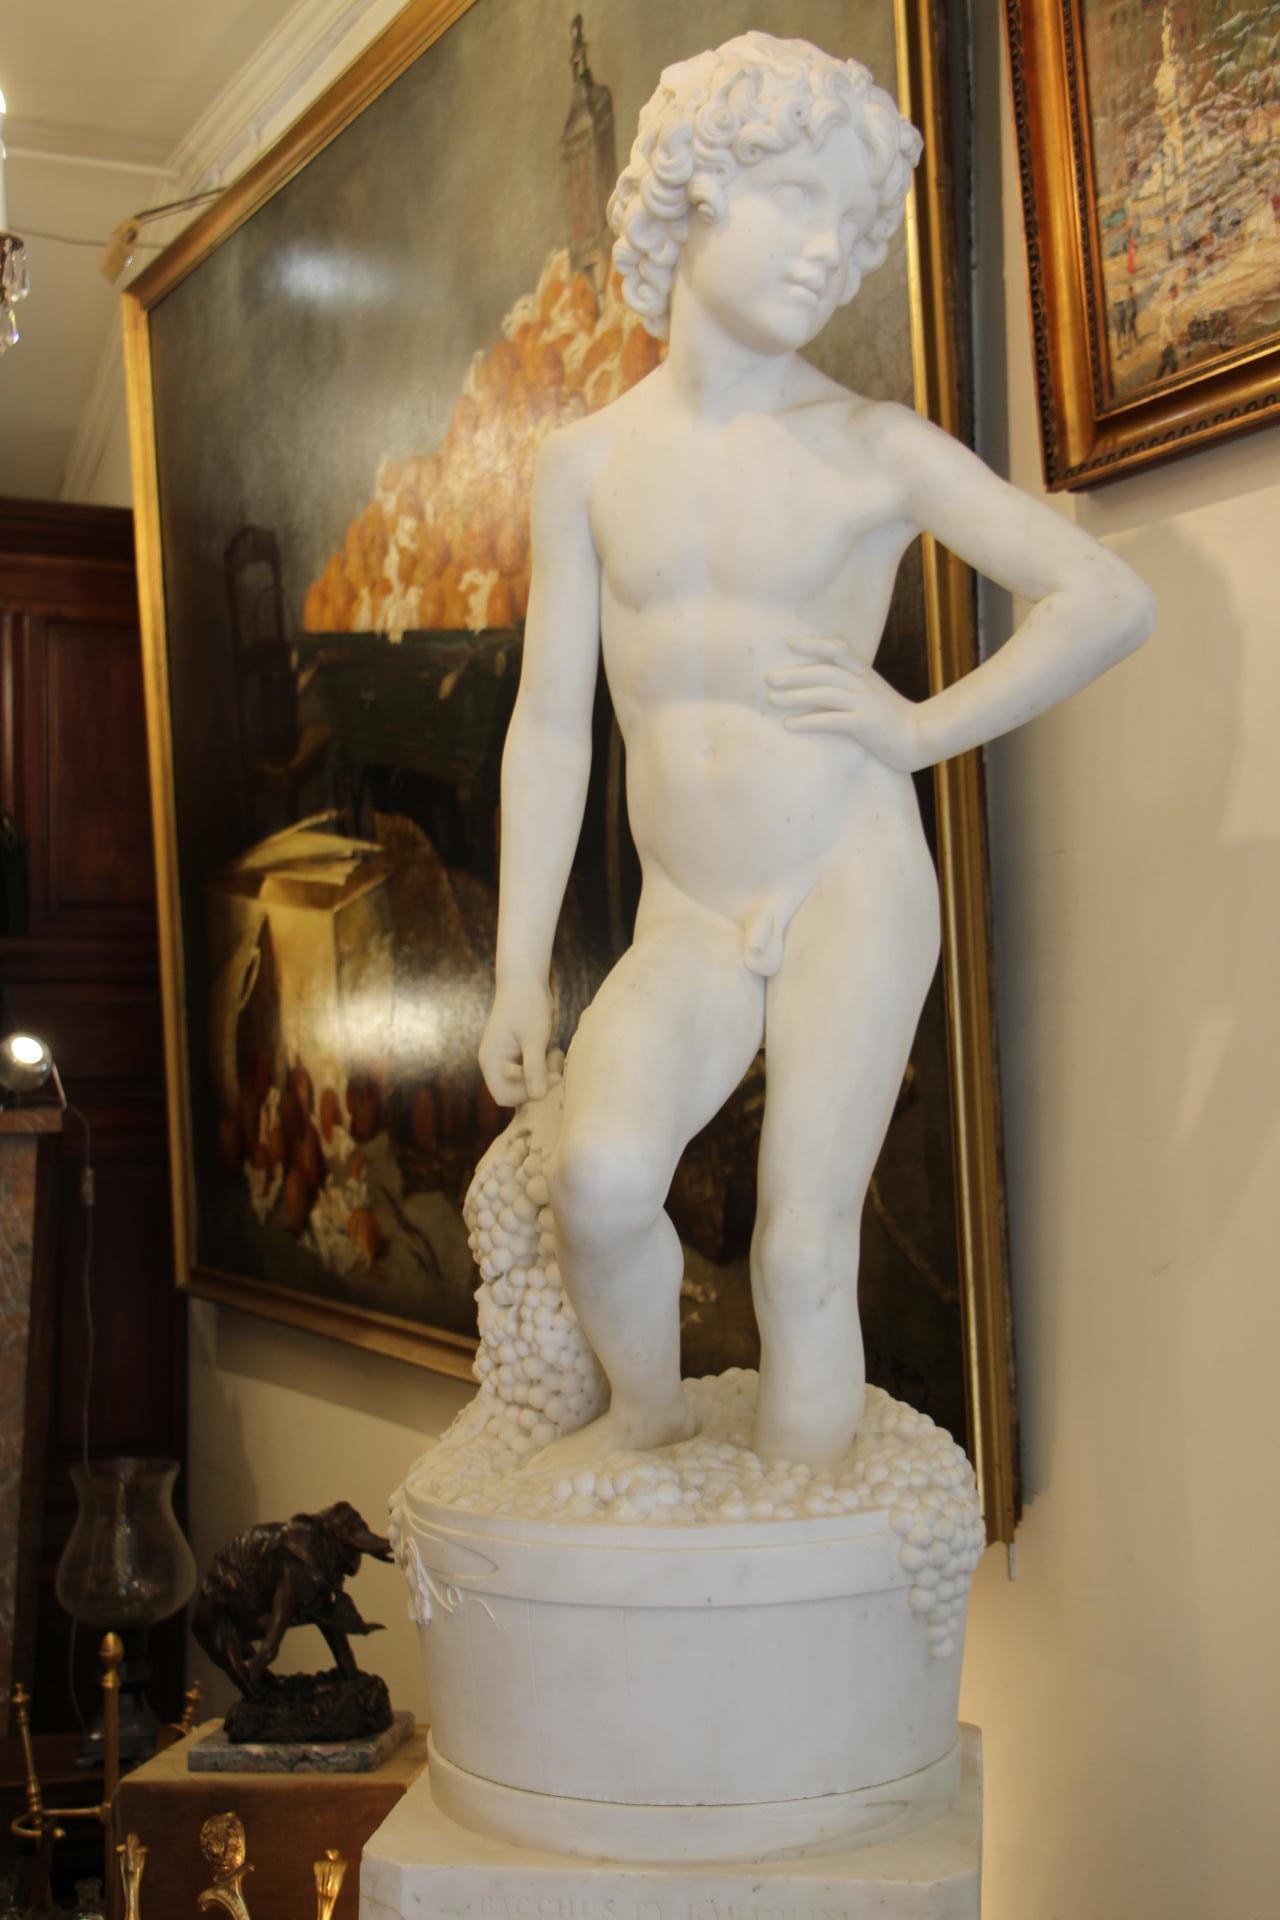 Beautiful Carrara marble sculpture by Pietro Bazzanti (1823-1874).
Young Bacchus standing in bunches of grapes.
Signed on the side .
œuvre référencée dans le livre :Romantissimo galerie d Italie.(photos)
This sculpture was inspired from the